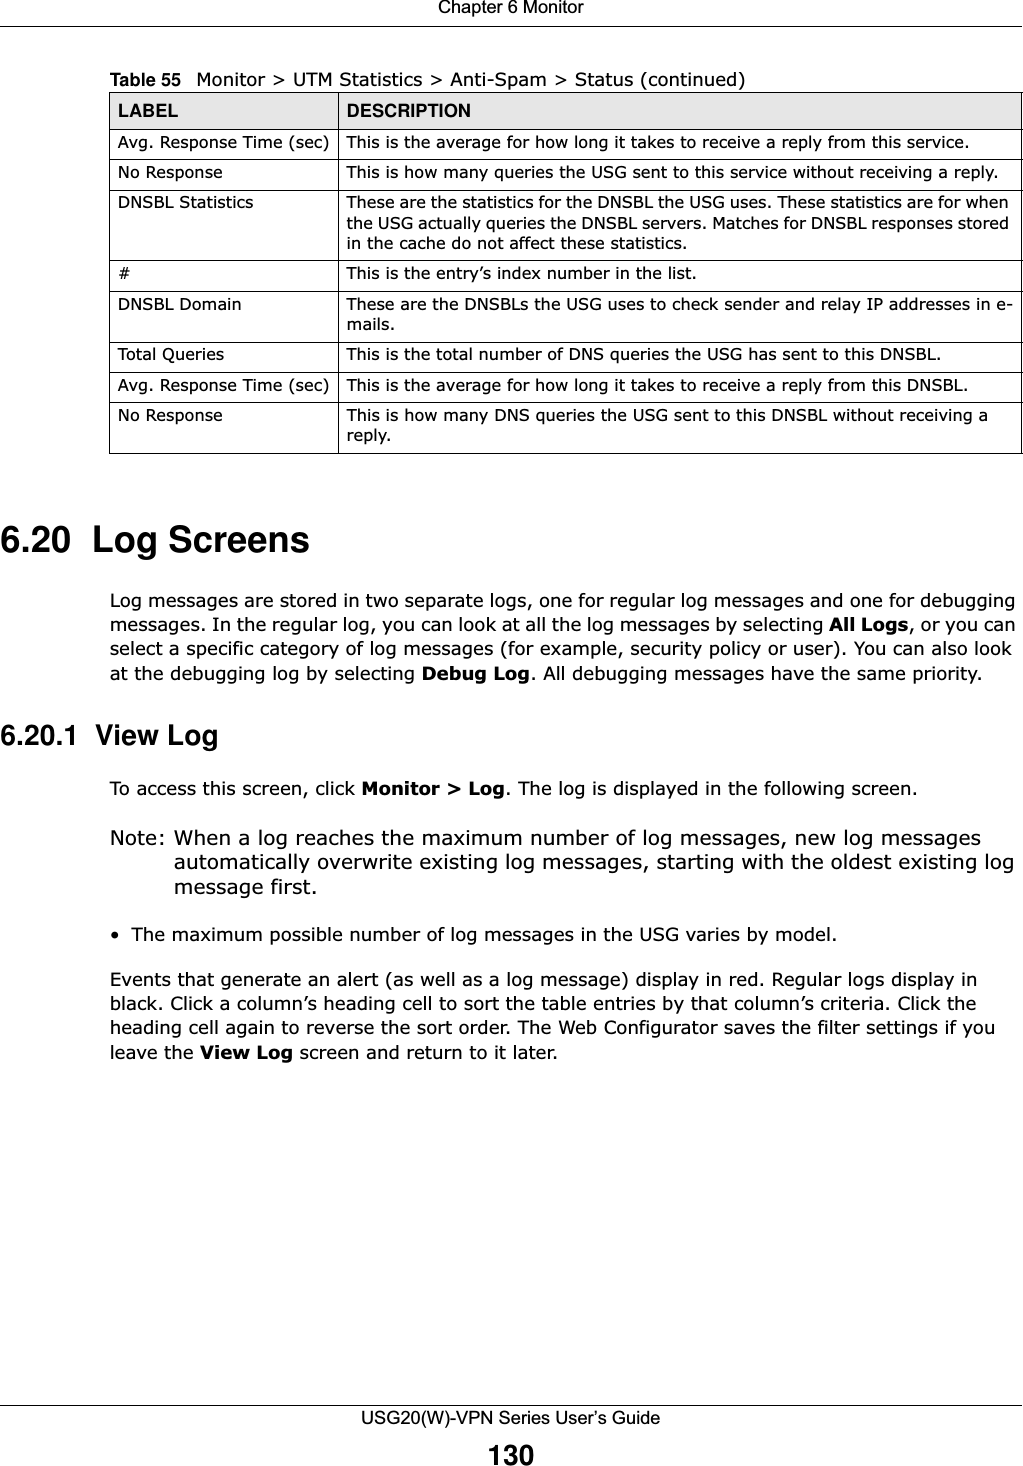 Chapter 6 MonitorUSG20(W)-VPN Series User’s Guide1306.20  Log ScreensLog messages are stored in two separate logs, one for regular log messages and one for debugging messages. In the regular log, you can look at all the log messages by selecting All Logs, or you can select a specific category of log messages (for example, security policy or user). You can also look at the debugging log by selecting Debug Log. All debugging messages have the same priority. 6.20.1  View LogTo access this screen, click Monitor &gt; Log. The log is displayed in the following screen.Note: When a log reaches the maximum number of log messages, new log messages automatically overwrite existing log messages, starting with the oldest existing log message first.• The maximum possible number of log messages in the USG varies by model.Events that generate an alert (as well as a log message) display in red. Regular logs display in black. Click a column’s heading cell to sort the table entries by that column’s criteria. Click the heading cell again to reverse the sort order. The Web Configurator saves the filter settings if you leave the View Log screen and return to it later.Avg. Response Time (sec) This is the average for how long it takes to receive a reply from this service.No Response This is how many queries the USG sent to this service without receiving a reply.DNSBL Statistics These are the statistics for the DNSBL the USG uses. These statistics are for when the USG actually queries the DNSBL servers. Matches for DNSBL responses stored in the cache do not affect these statistics.#This is the entry’s index number in the list.DNSBL Domain These are the DNSBLs the USG uses to check sender and relay IP addresses in e-mails.Total Queries This is the total number of DNS queries the USG has sent to this DNSBL.Avg. Response Time (sec) This is the average for how long it takes to receive a reply from this DNSBL.No Response This is how many DNS queries the USG sent to this DNSBL without receiving a reply.Table 55   Monitor &gt; UTM Statistics &gt; Anti-Spam &gt; Status (continued)LABEL DESCRIPTION